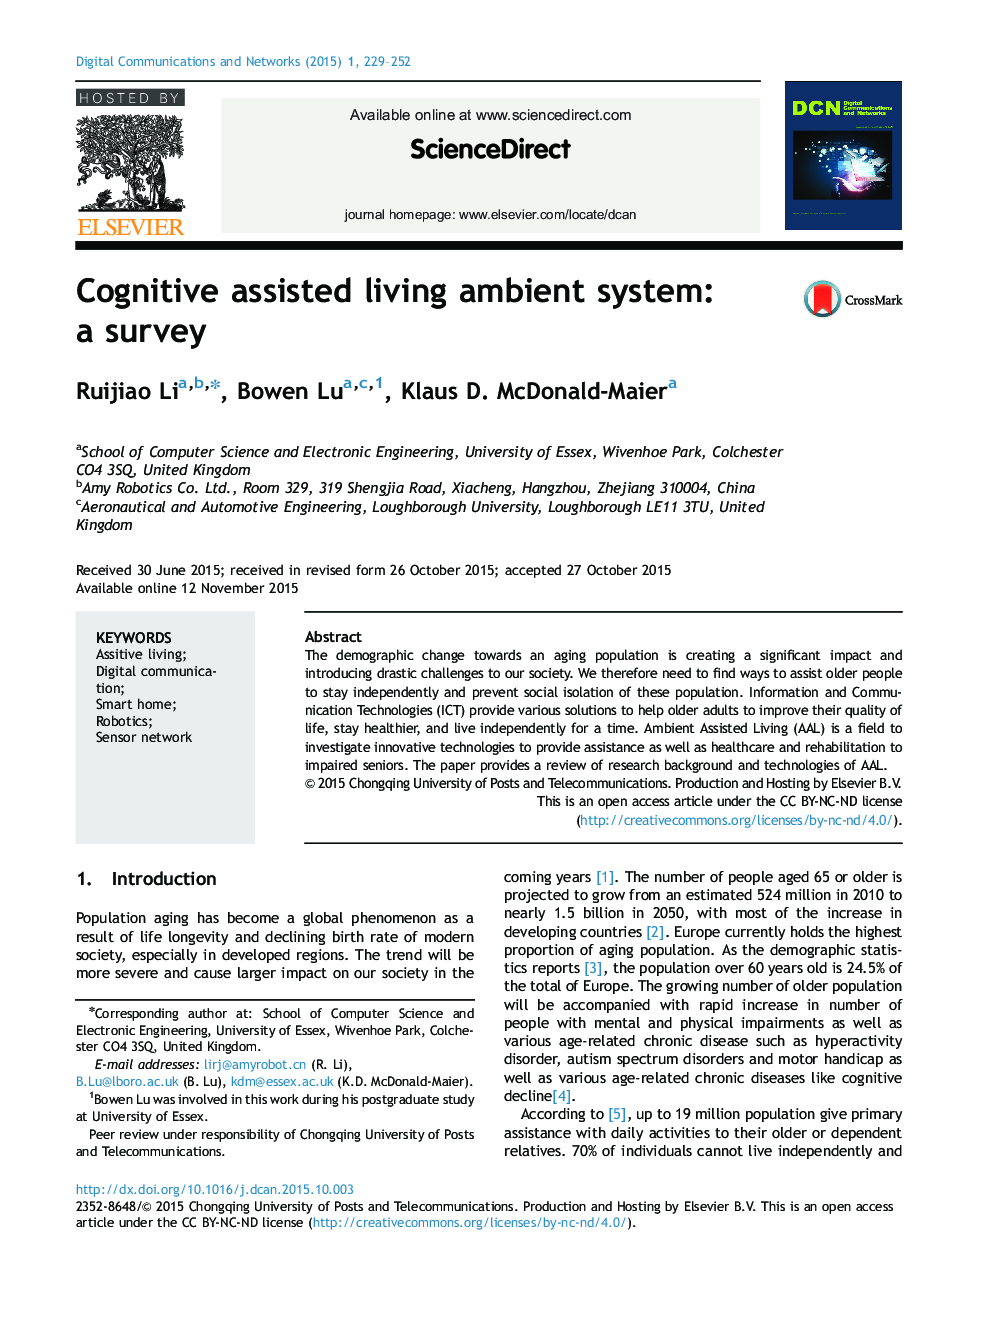 Cognitive assisted living ambient system: a survey 